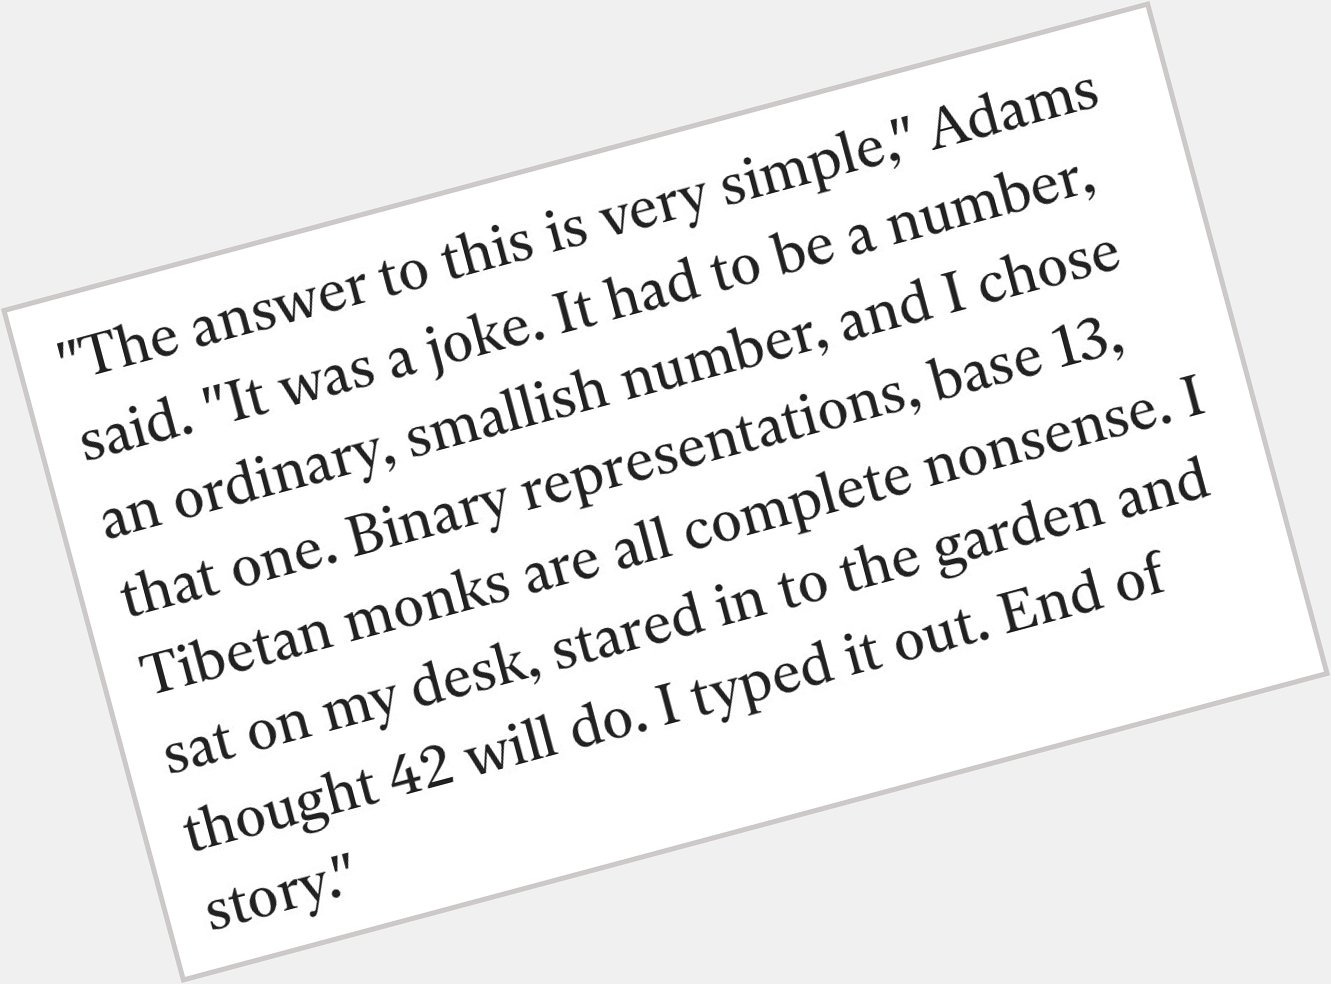  Happy Birthday! Here s what Douglas Adams said on why he chose 42 as the answer: 